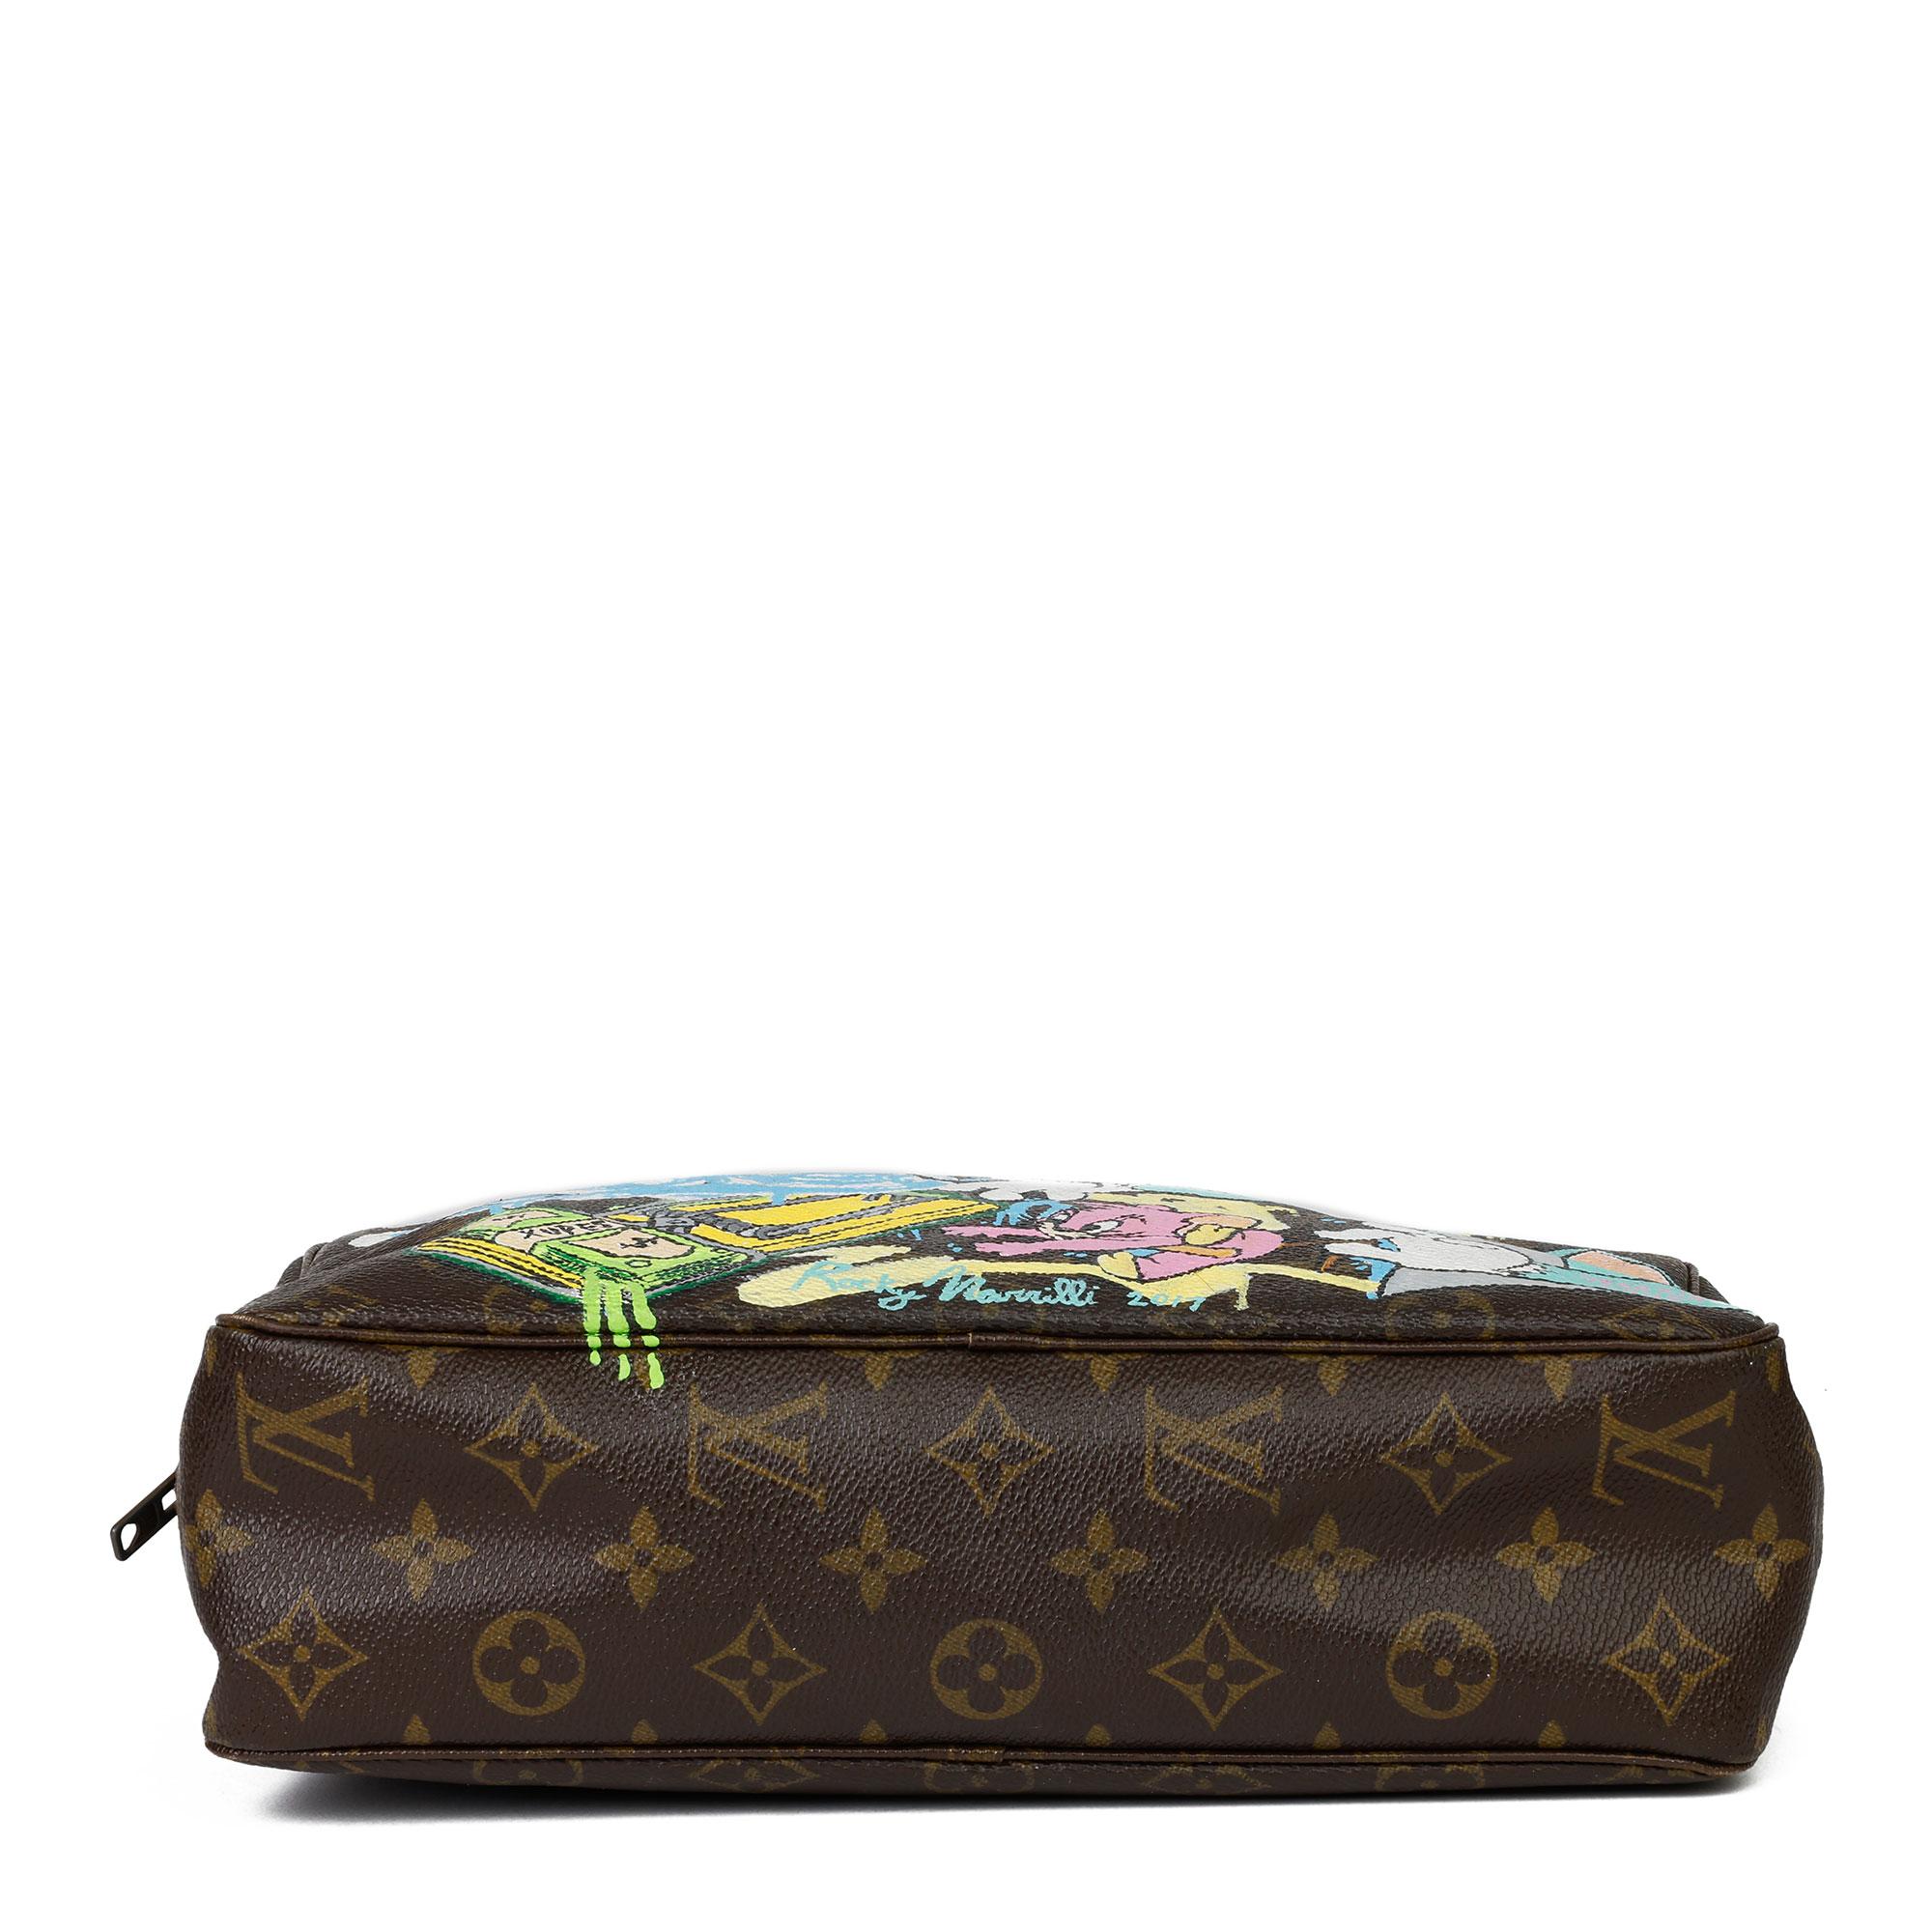 LOUIS VUITTON
Hand-painted 'Get This Money' X Year Zero London Toiletry Pouch

Xupes Reference: CB327
Serial Number: 833
Age (Circa): 1983
Authenticity Details: Date Stamp (Made in France)
Gender: Ladies
Type: Travel, Accessory

Colour: Multi